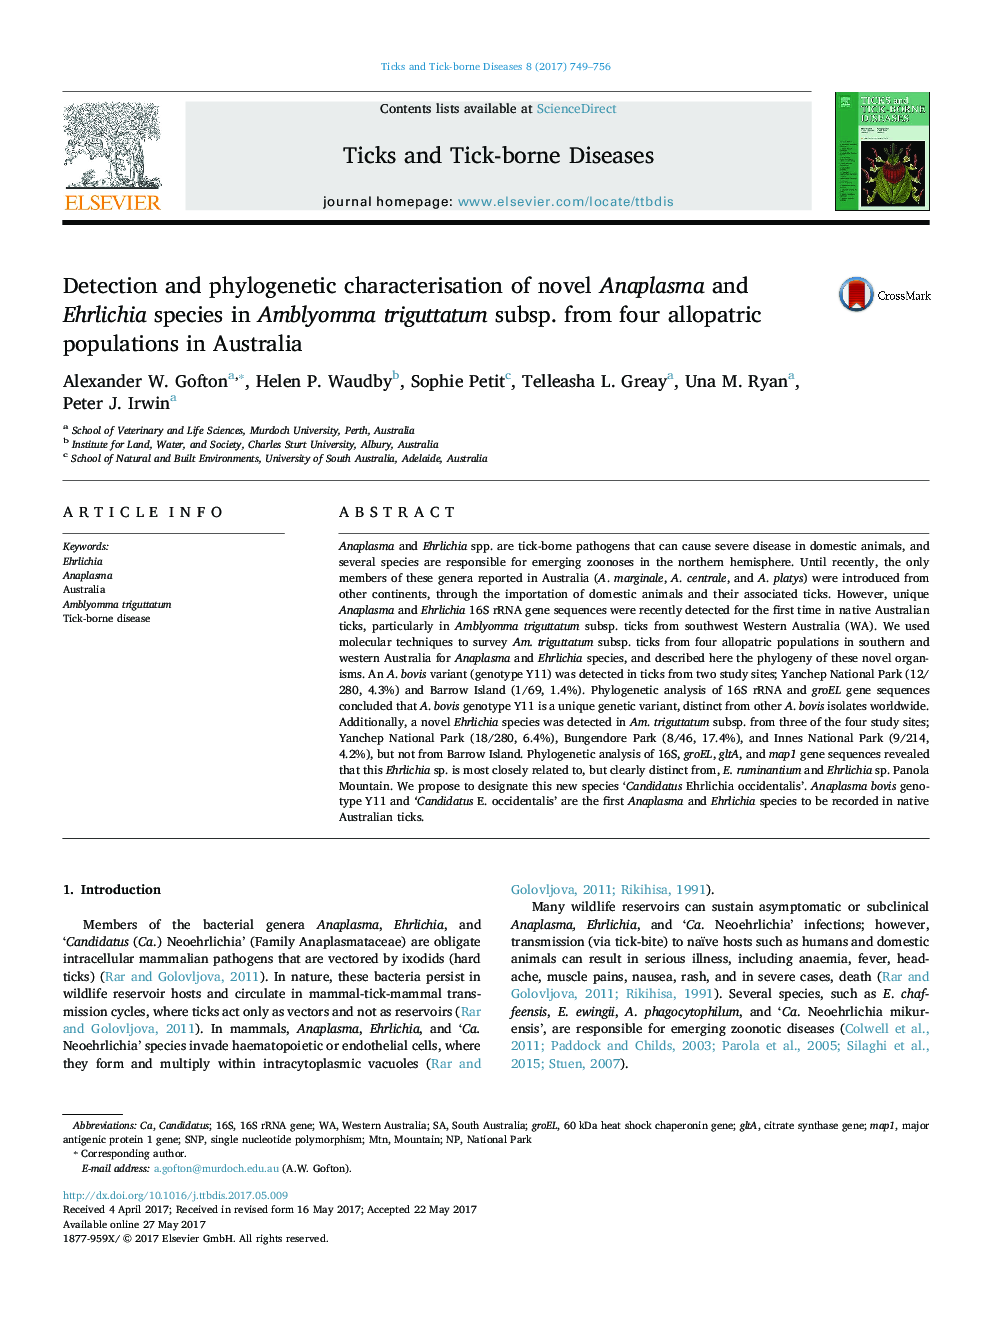 Detection and phylogenetic characterisation of novel Anaplasma and Ehrlichia species in Amblyomma triguttatum subsp. from four allopatric populations in Australia